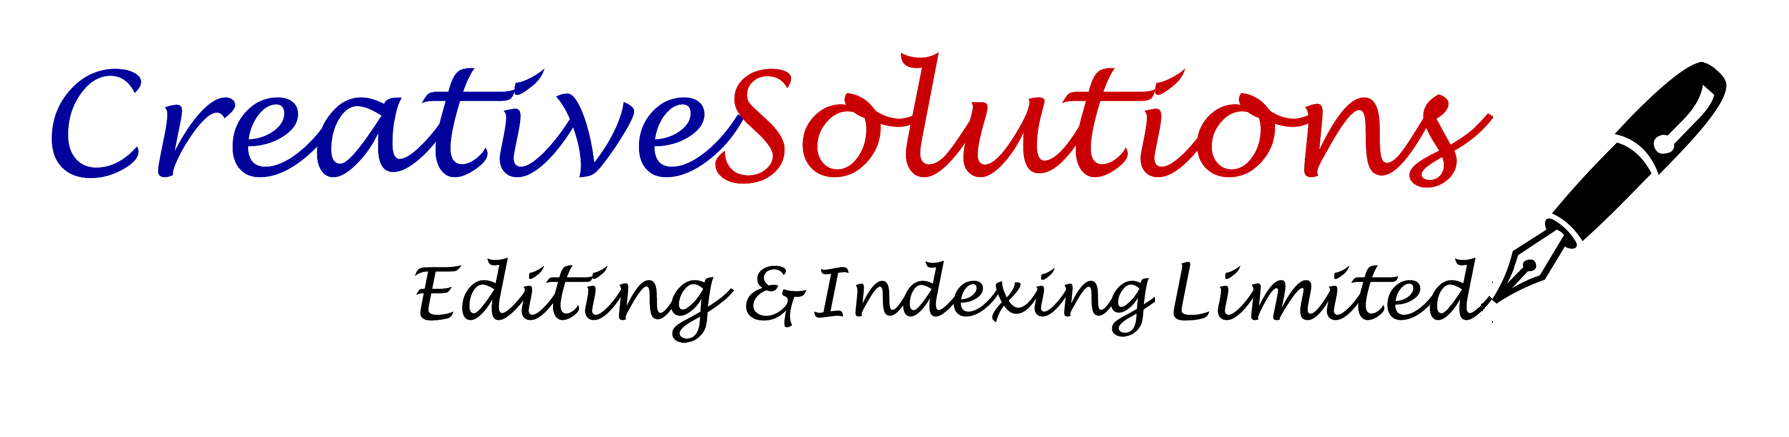 Creative Solutions Editing and Indexing Limited